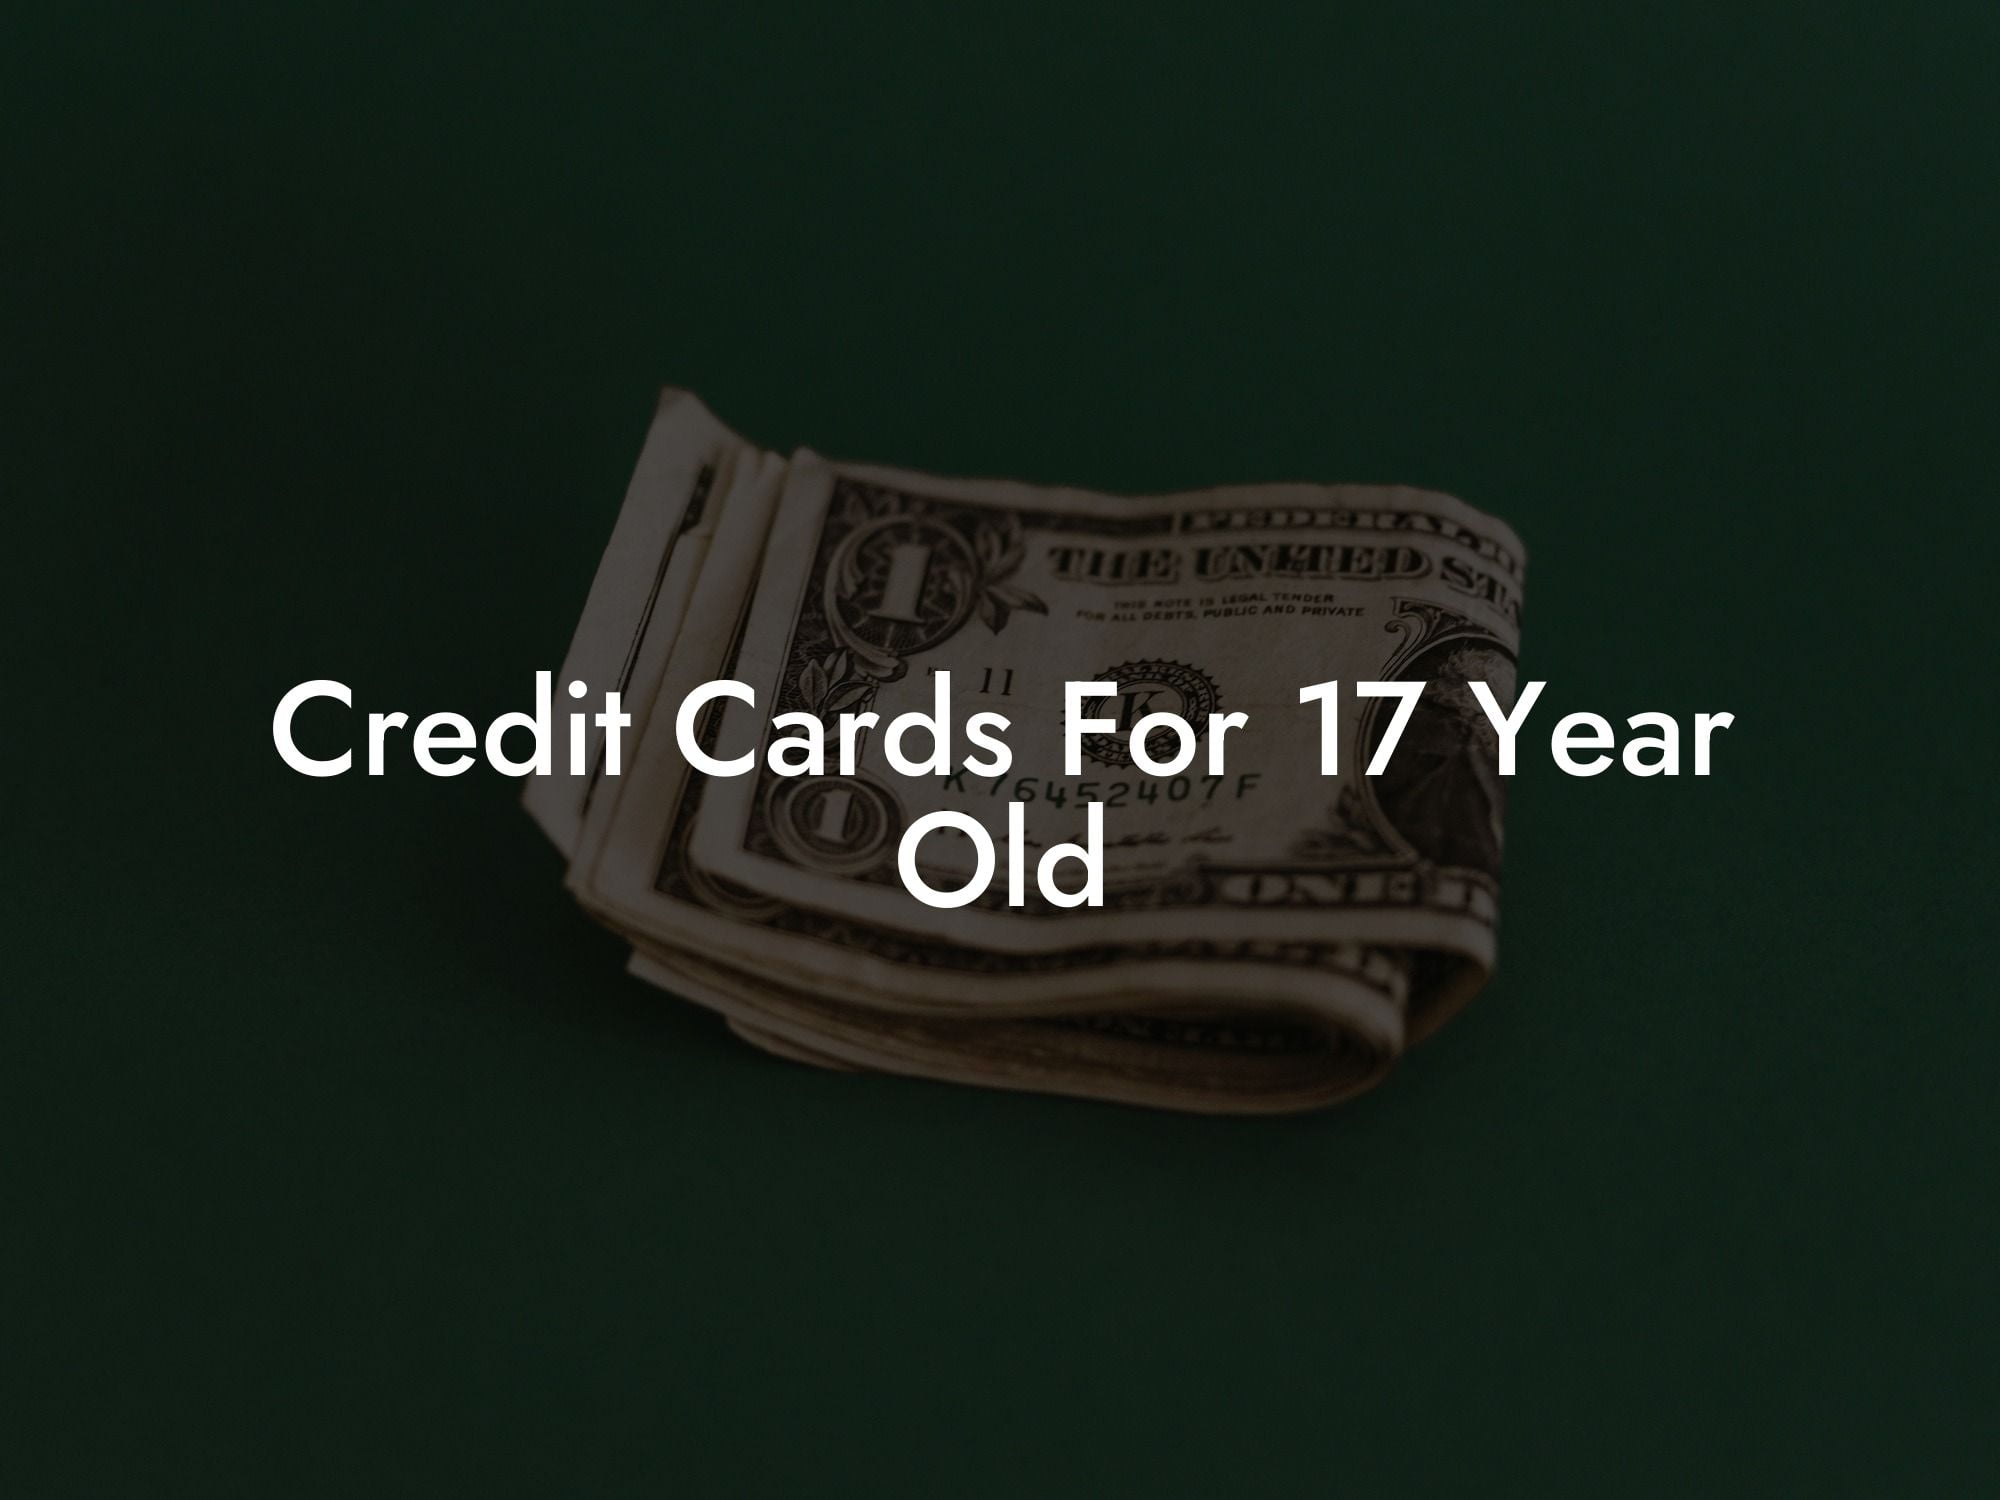 Credit Cards For 17 Year Old